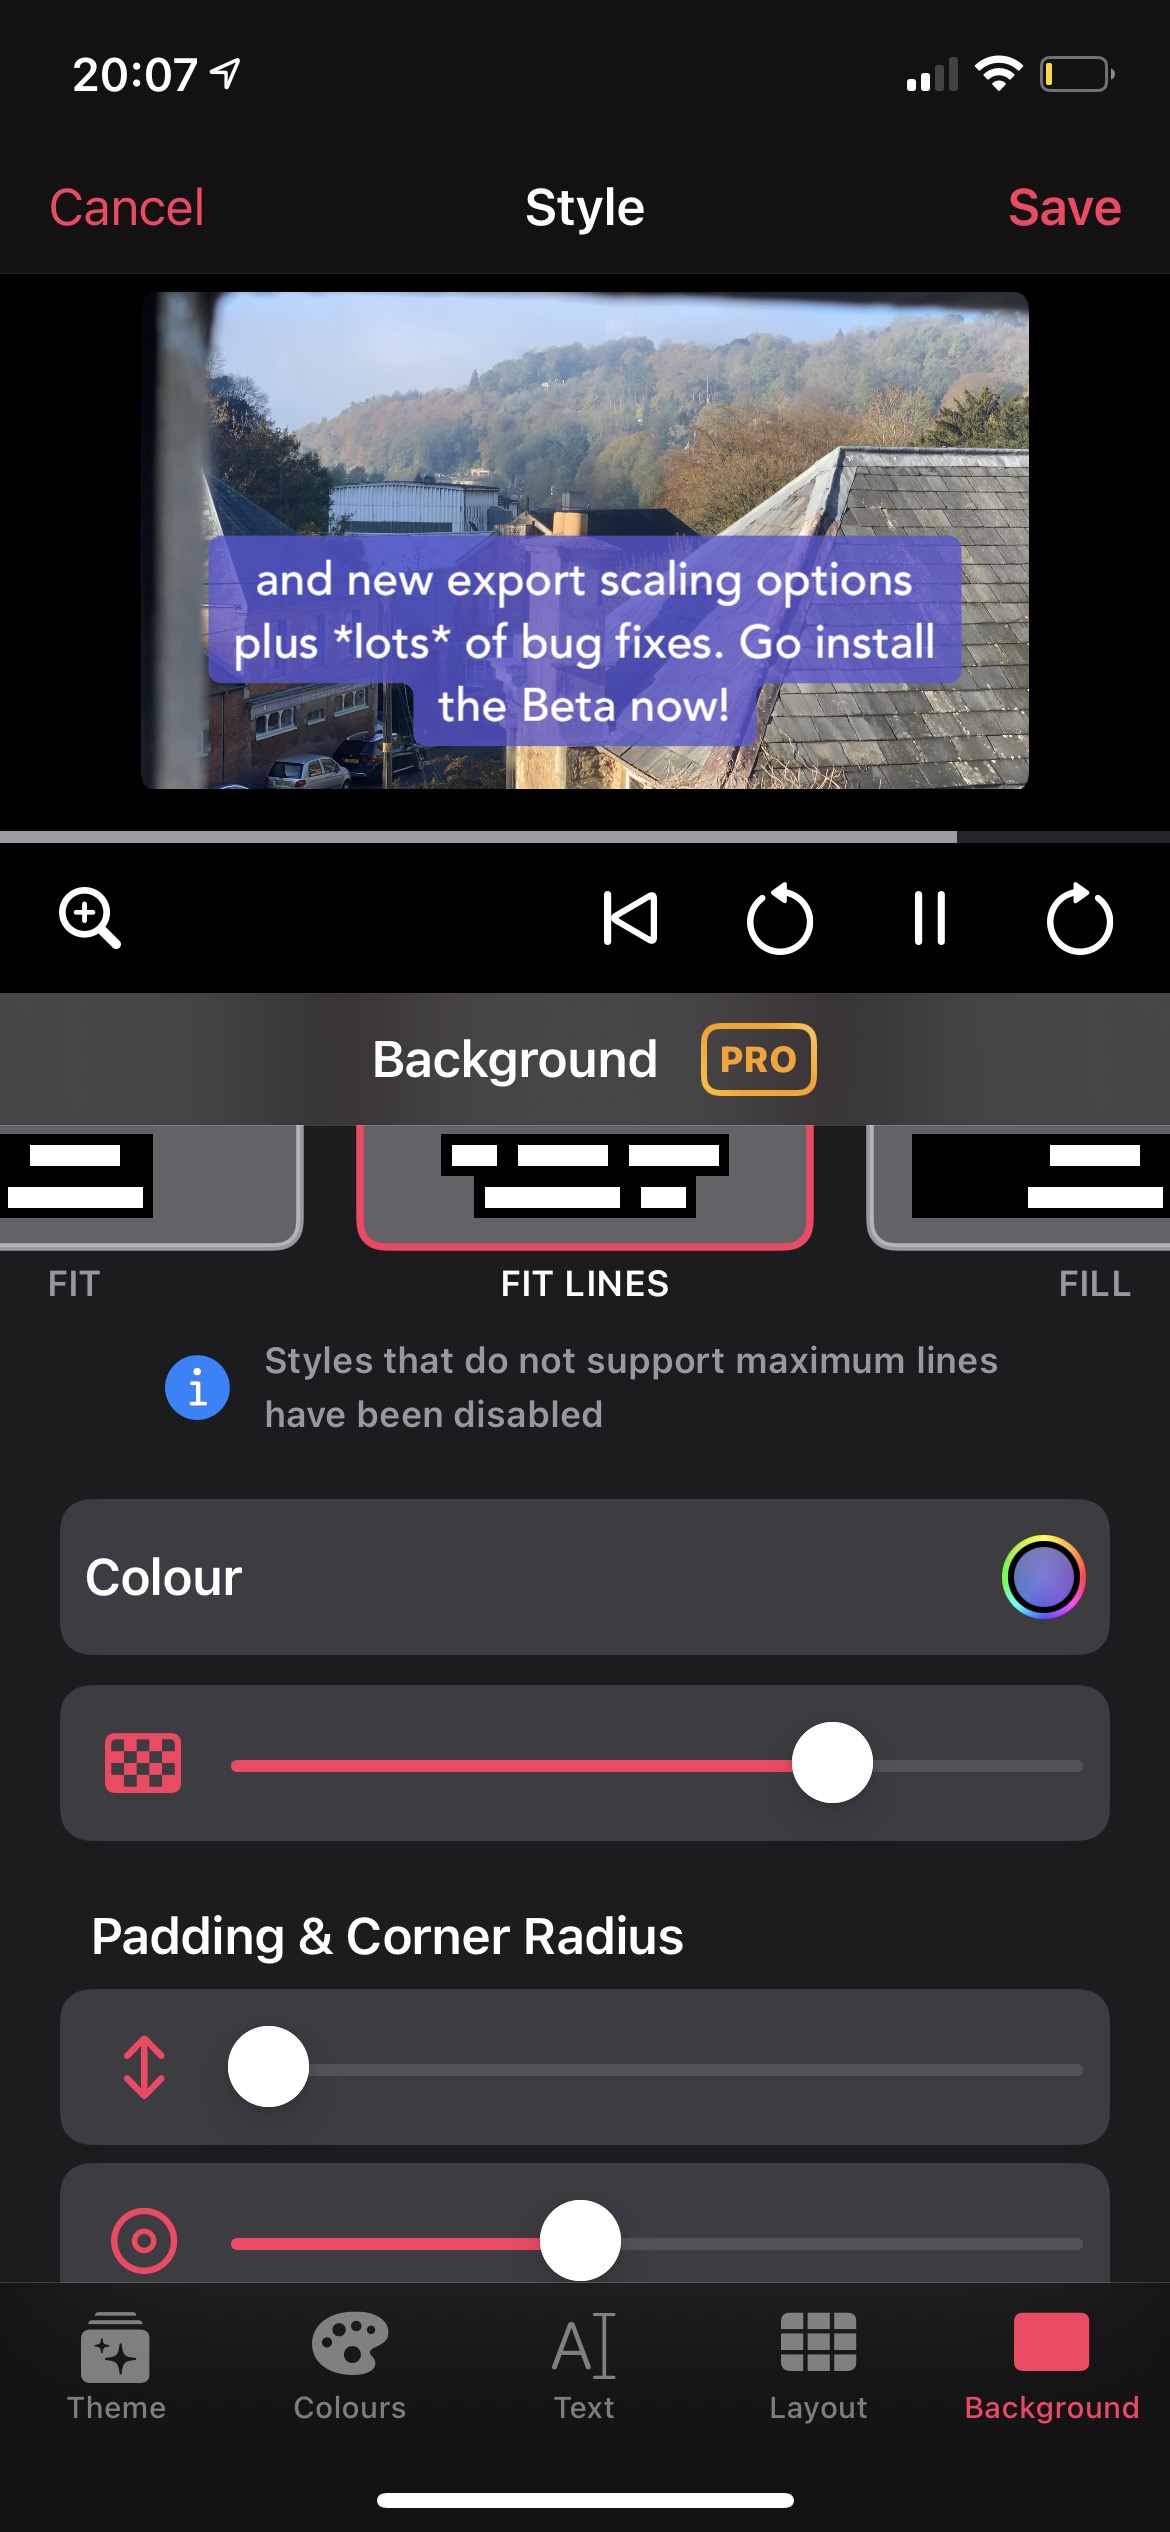 Screenshot of a the new styling UI showing the background options